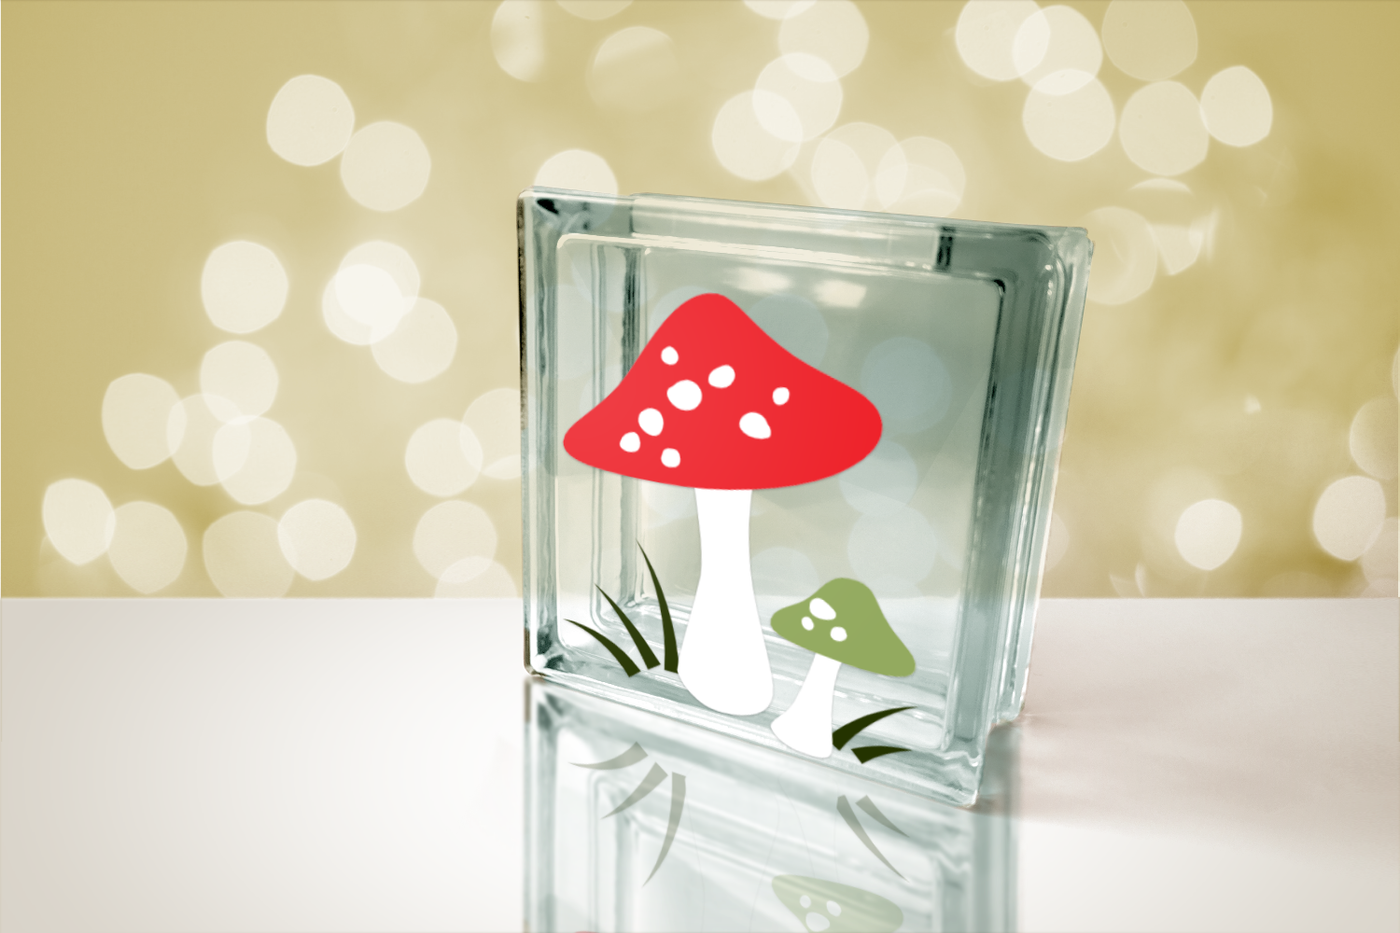 Toadstool design on a glass block